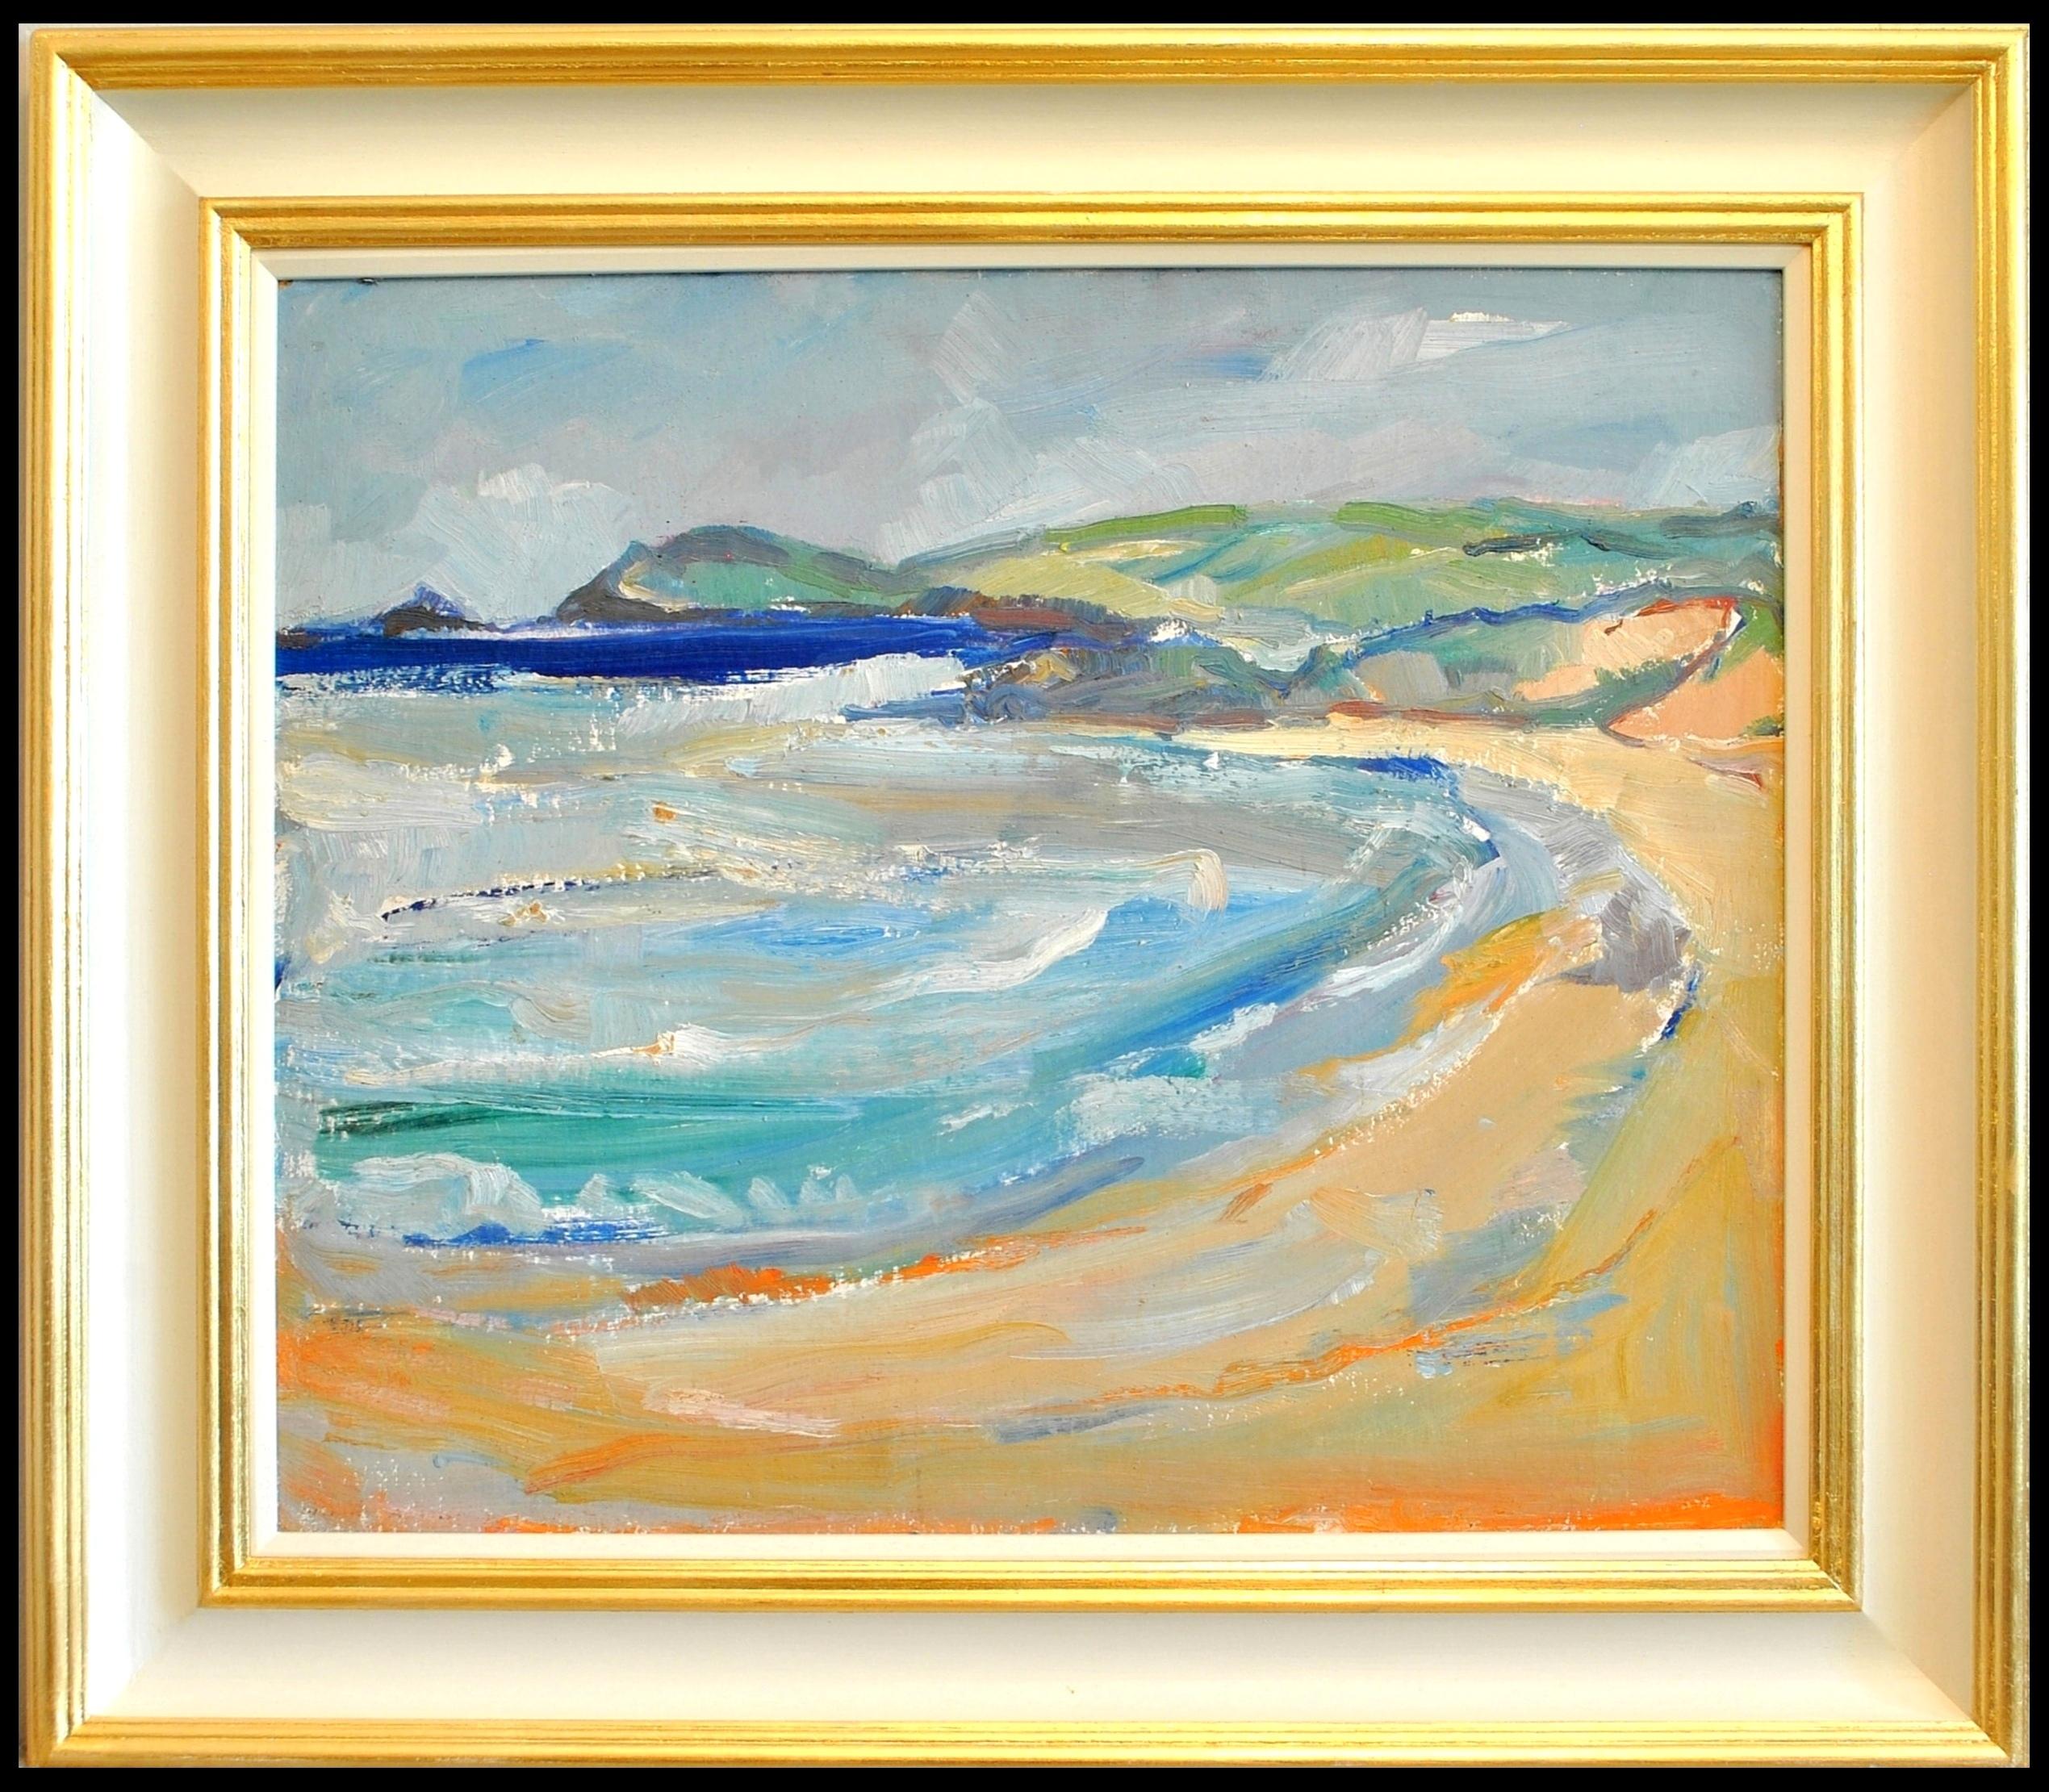 Gilbert Adams Landscape Painting - Constantine Bay Cornwall - Mid 20th Century English Impressionist Beach Painting